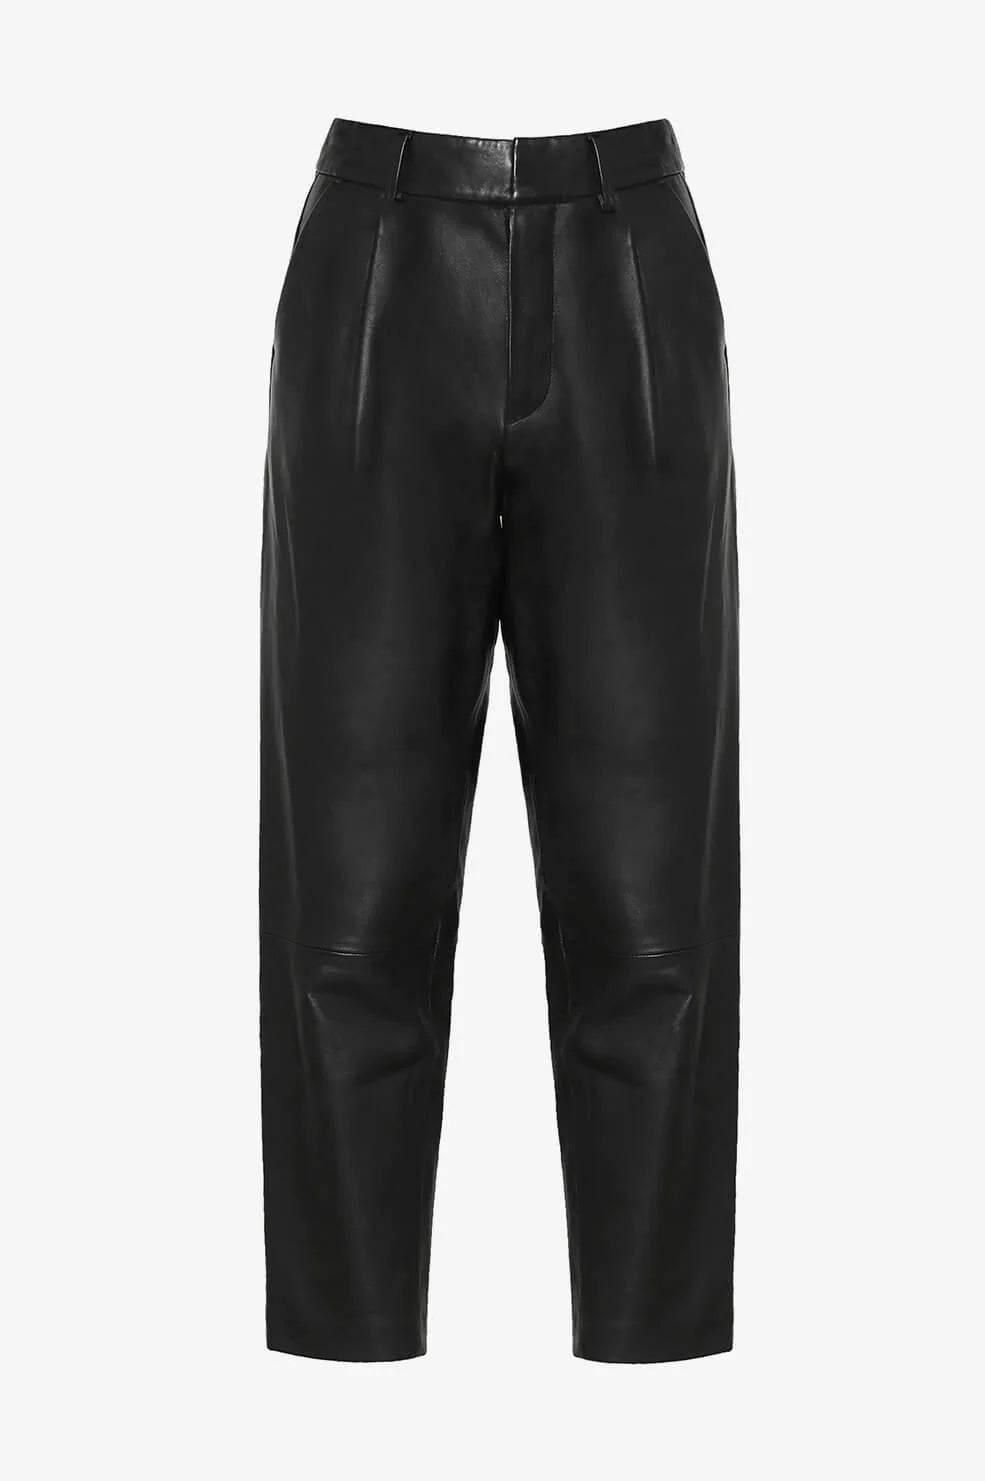 Anine Bing Becky Leather Trouser - Black